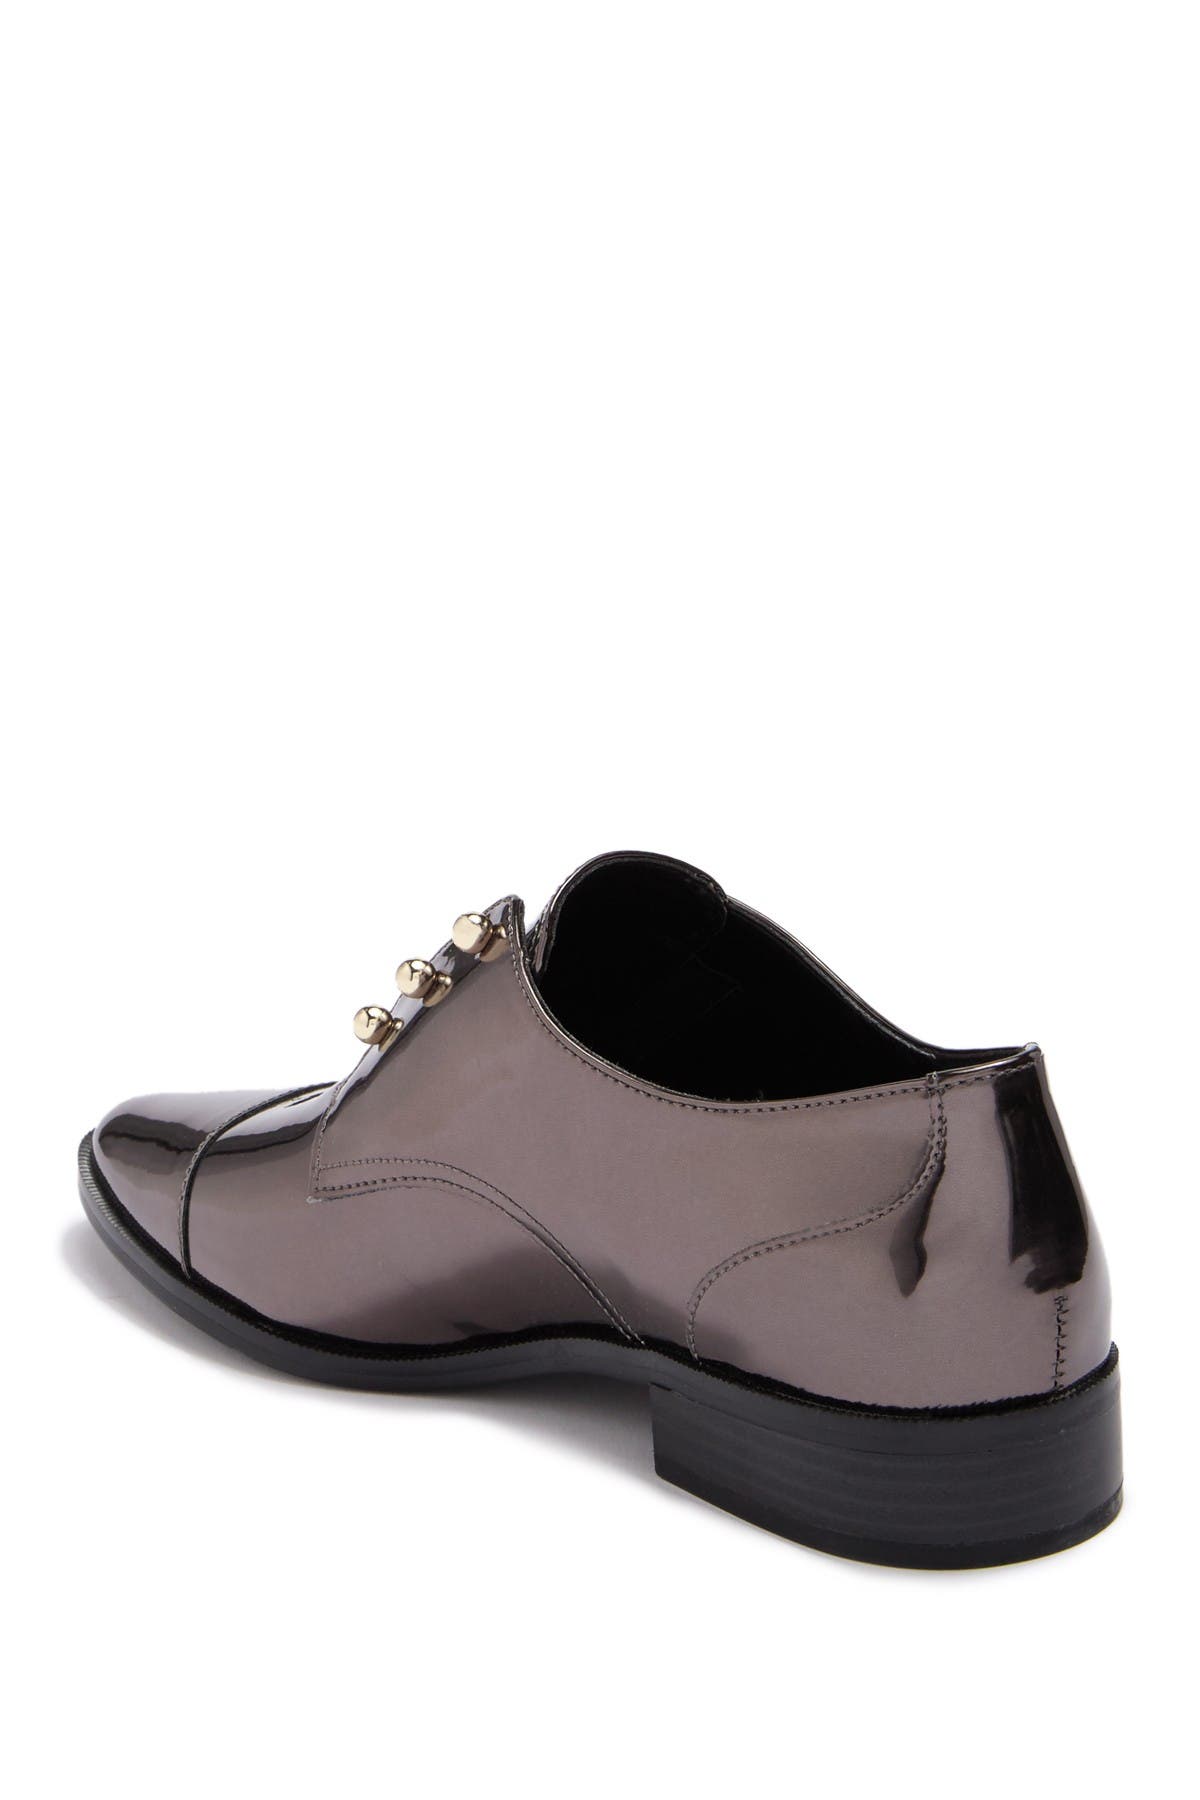 nine west wearable oxford shoes